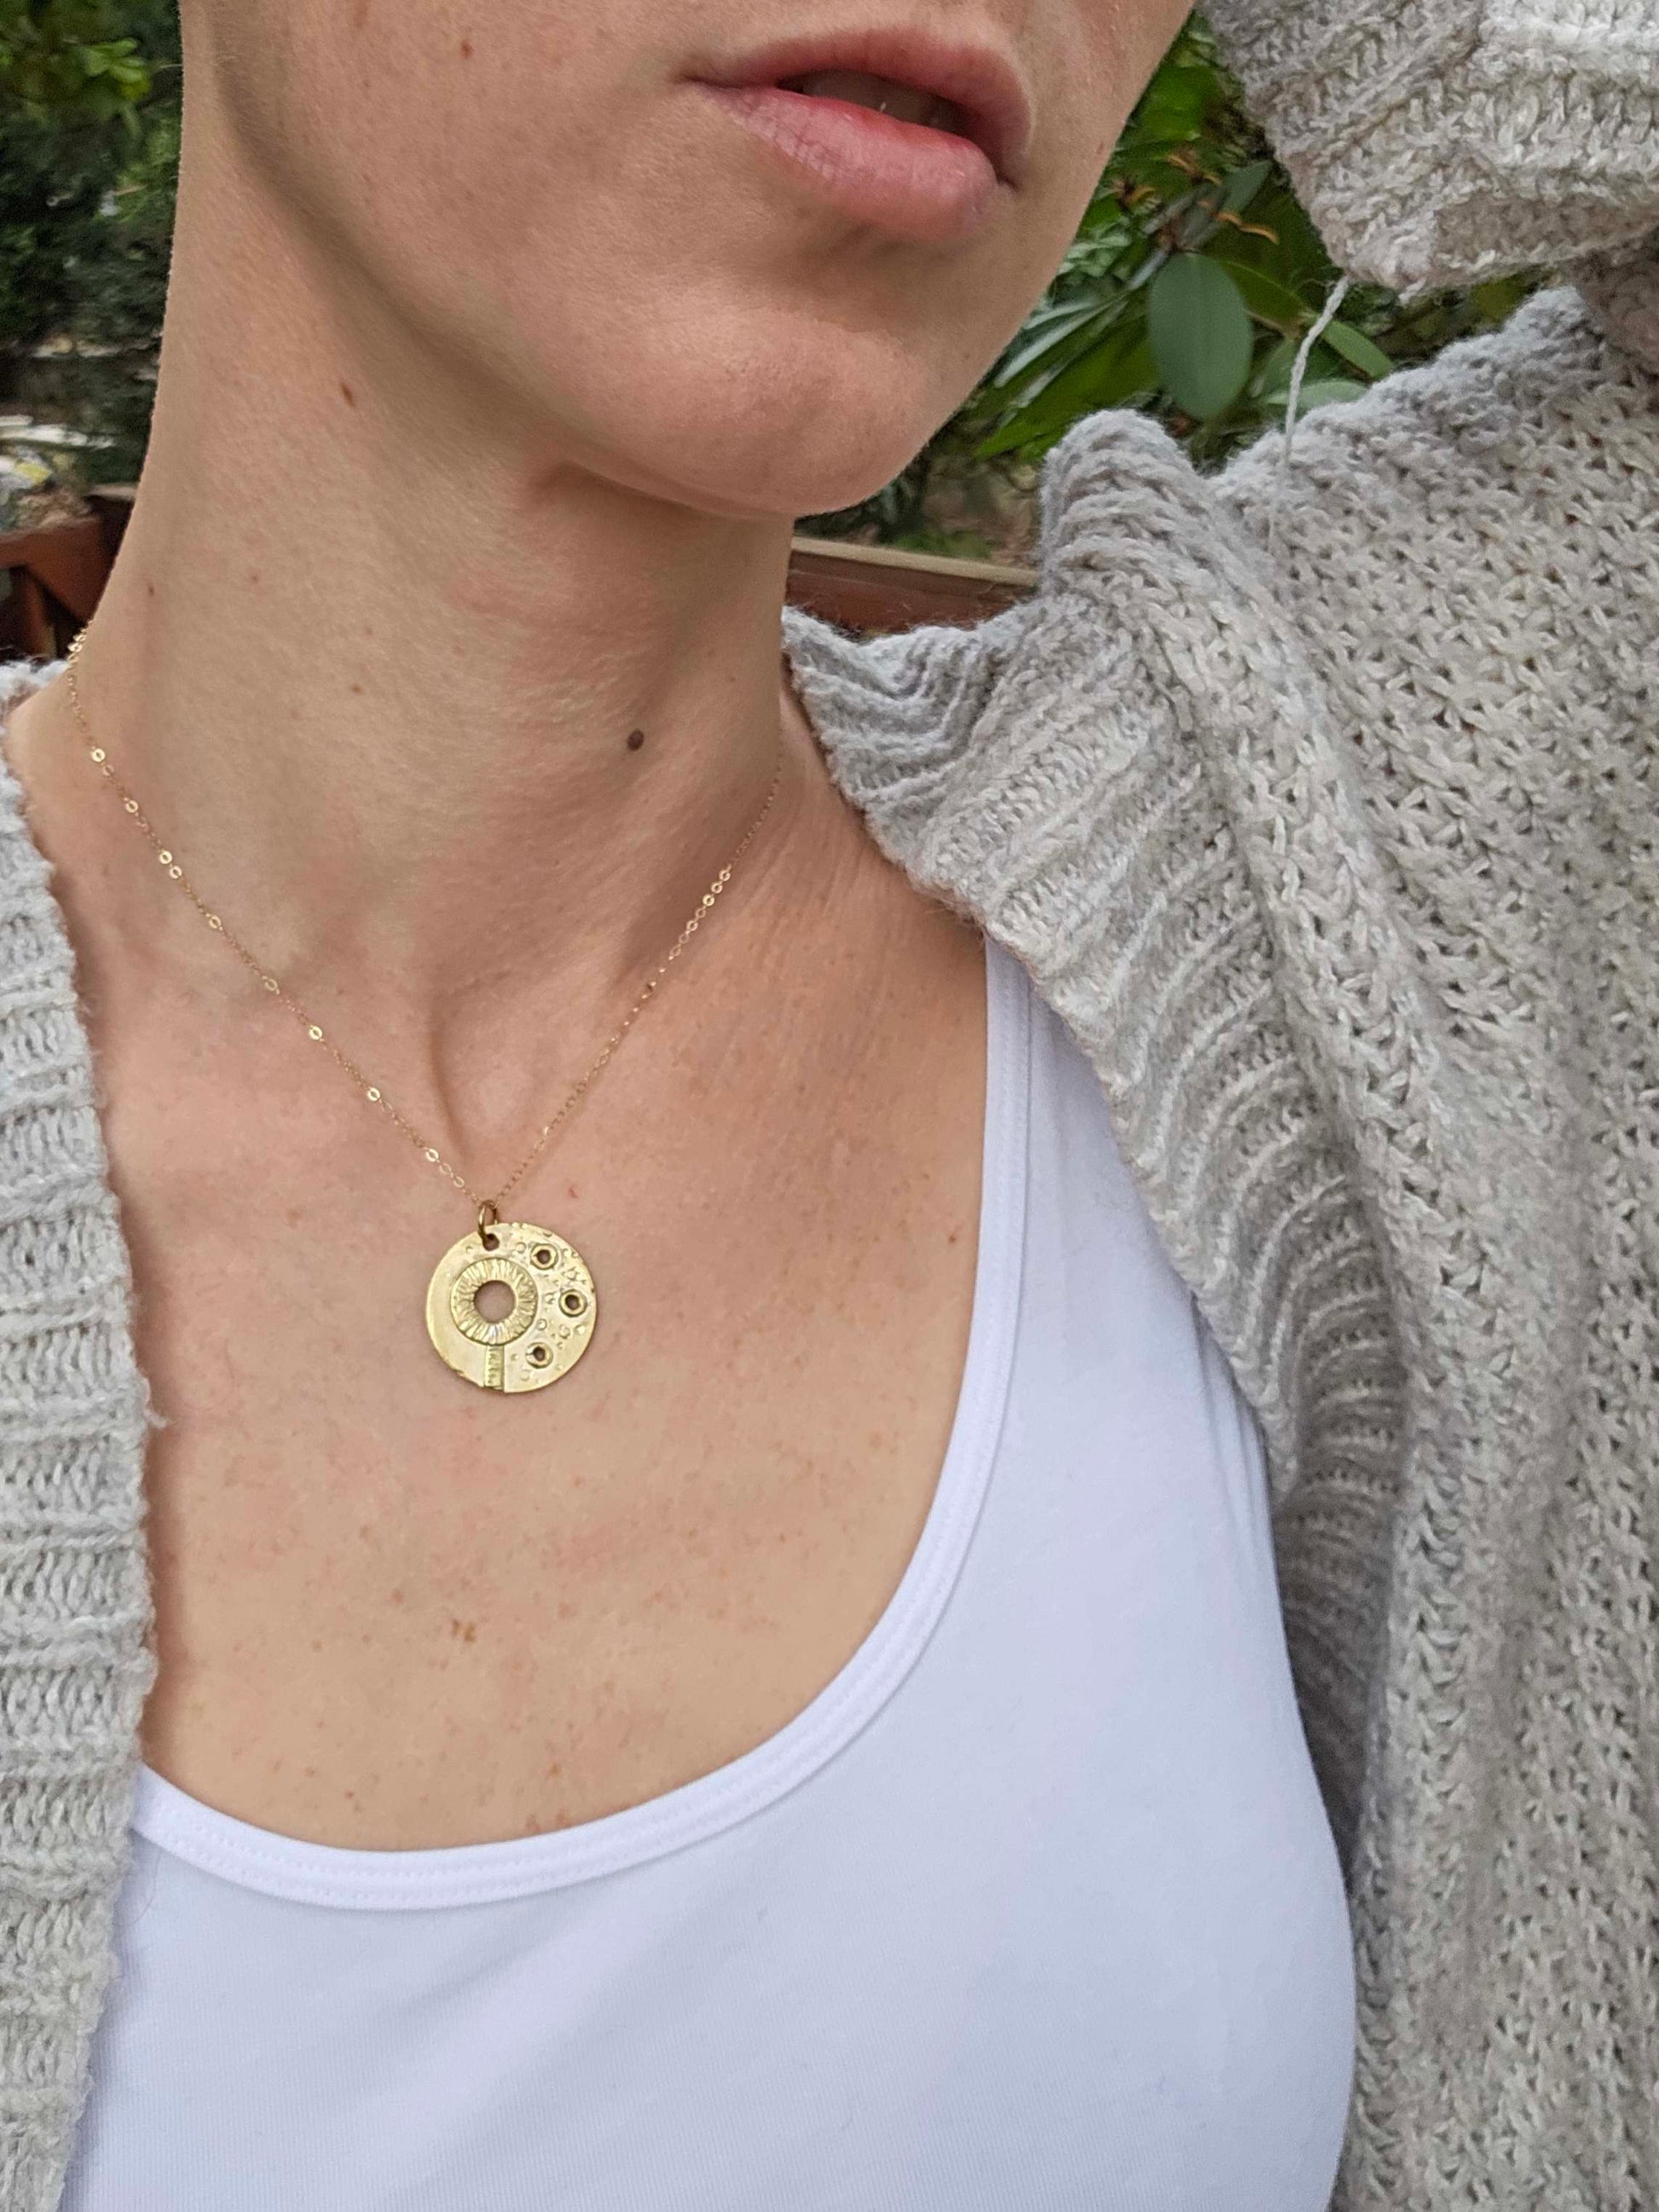 Gold Bubble Breathing Necklace modeled by woman